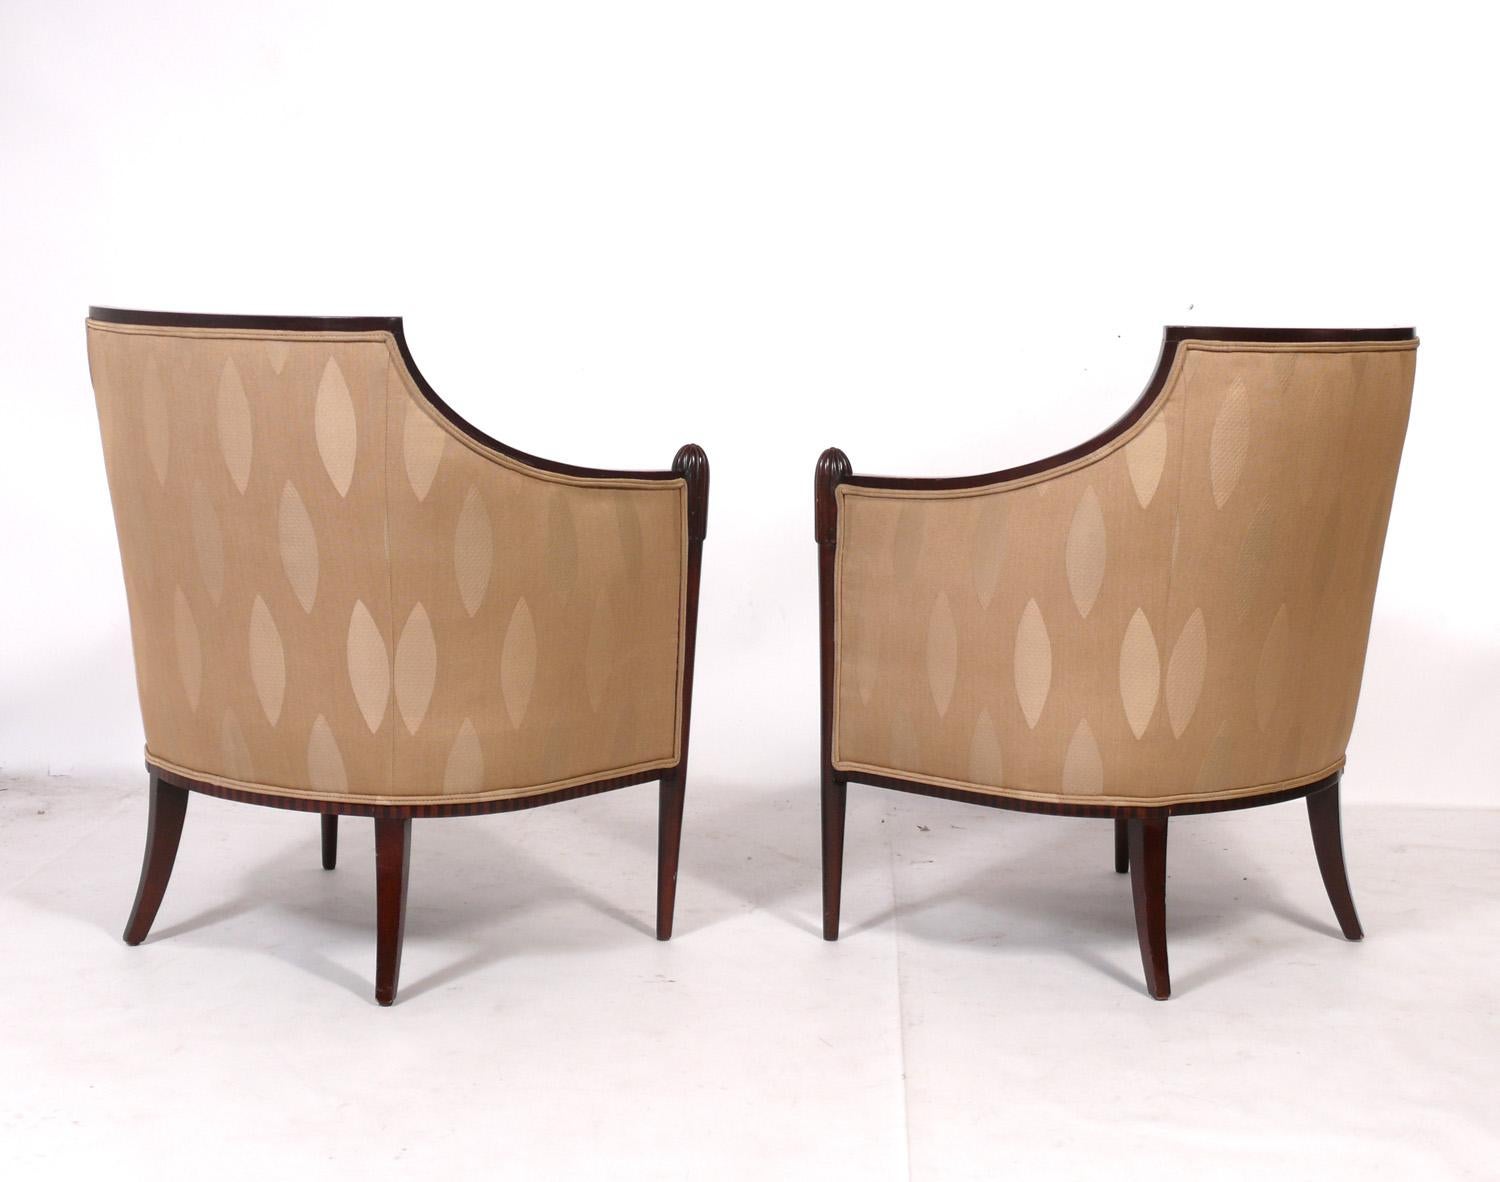 American Pair of Art Deco Style Chairs by Barbara Barry for Baker Refinished Reupholsterd